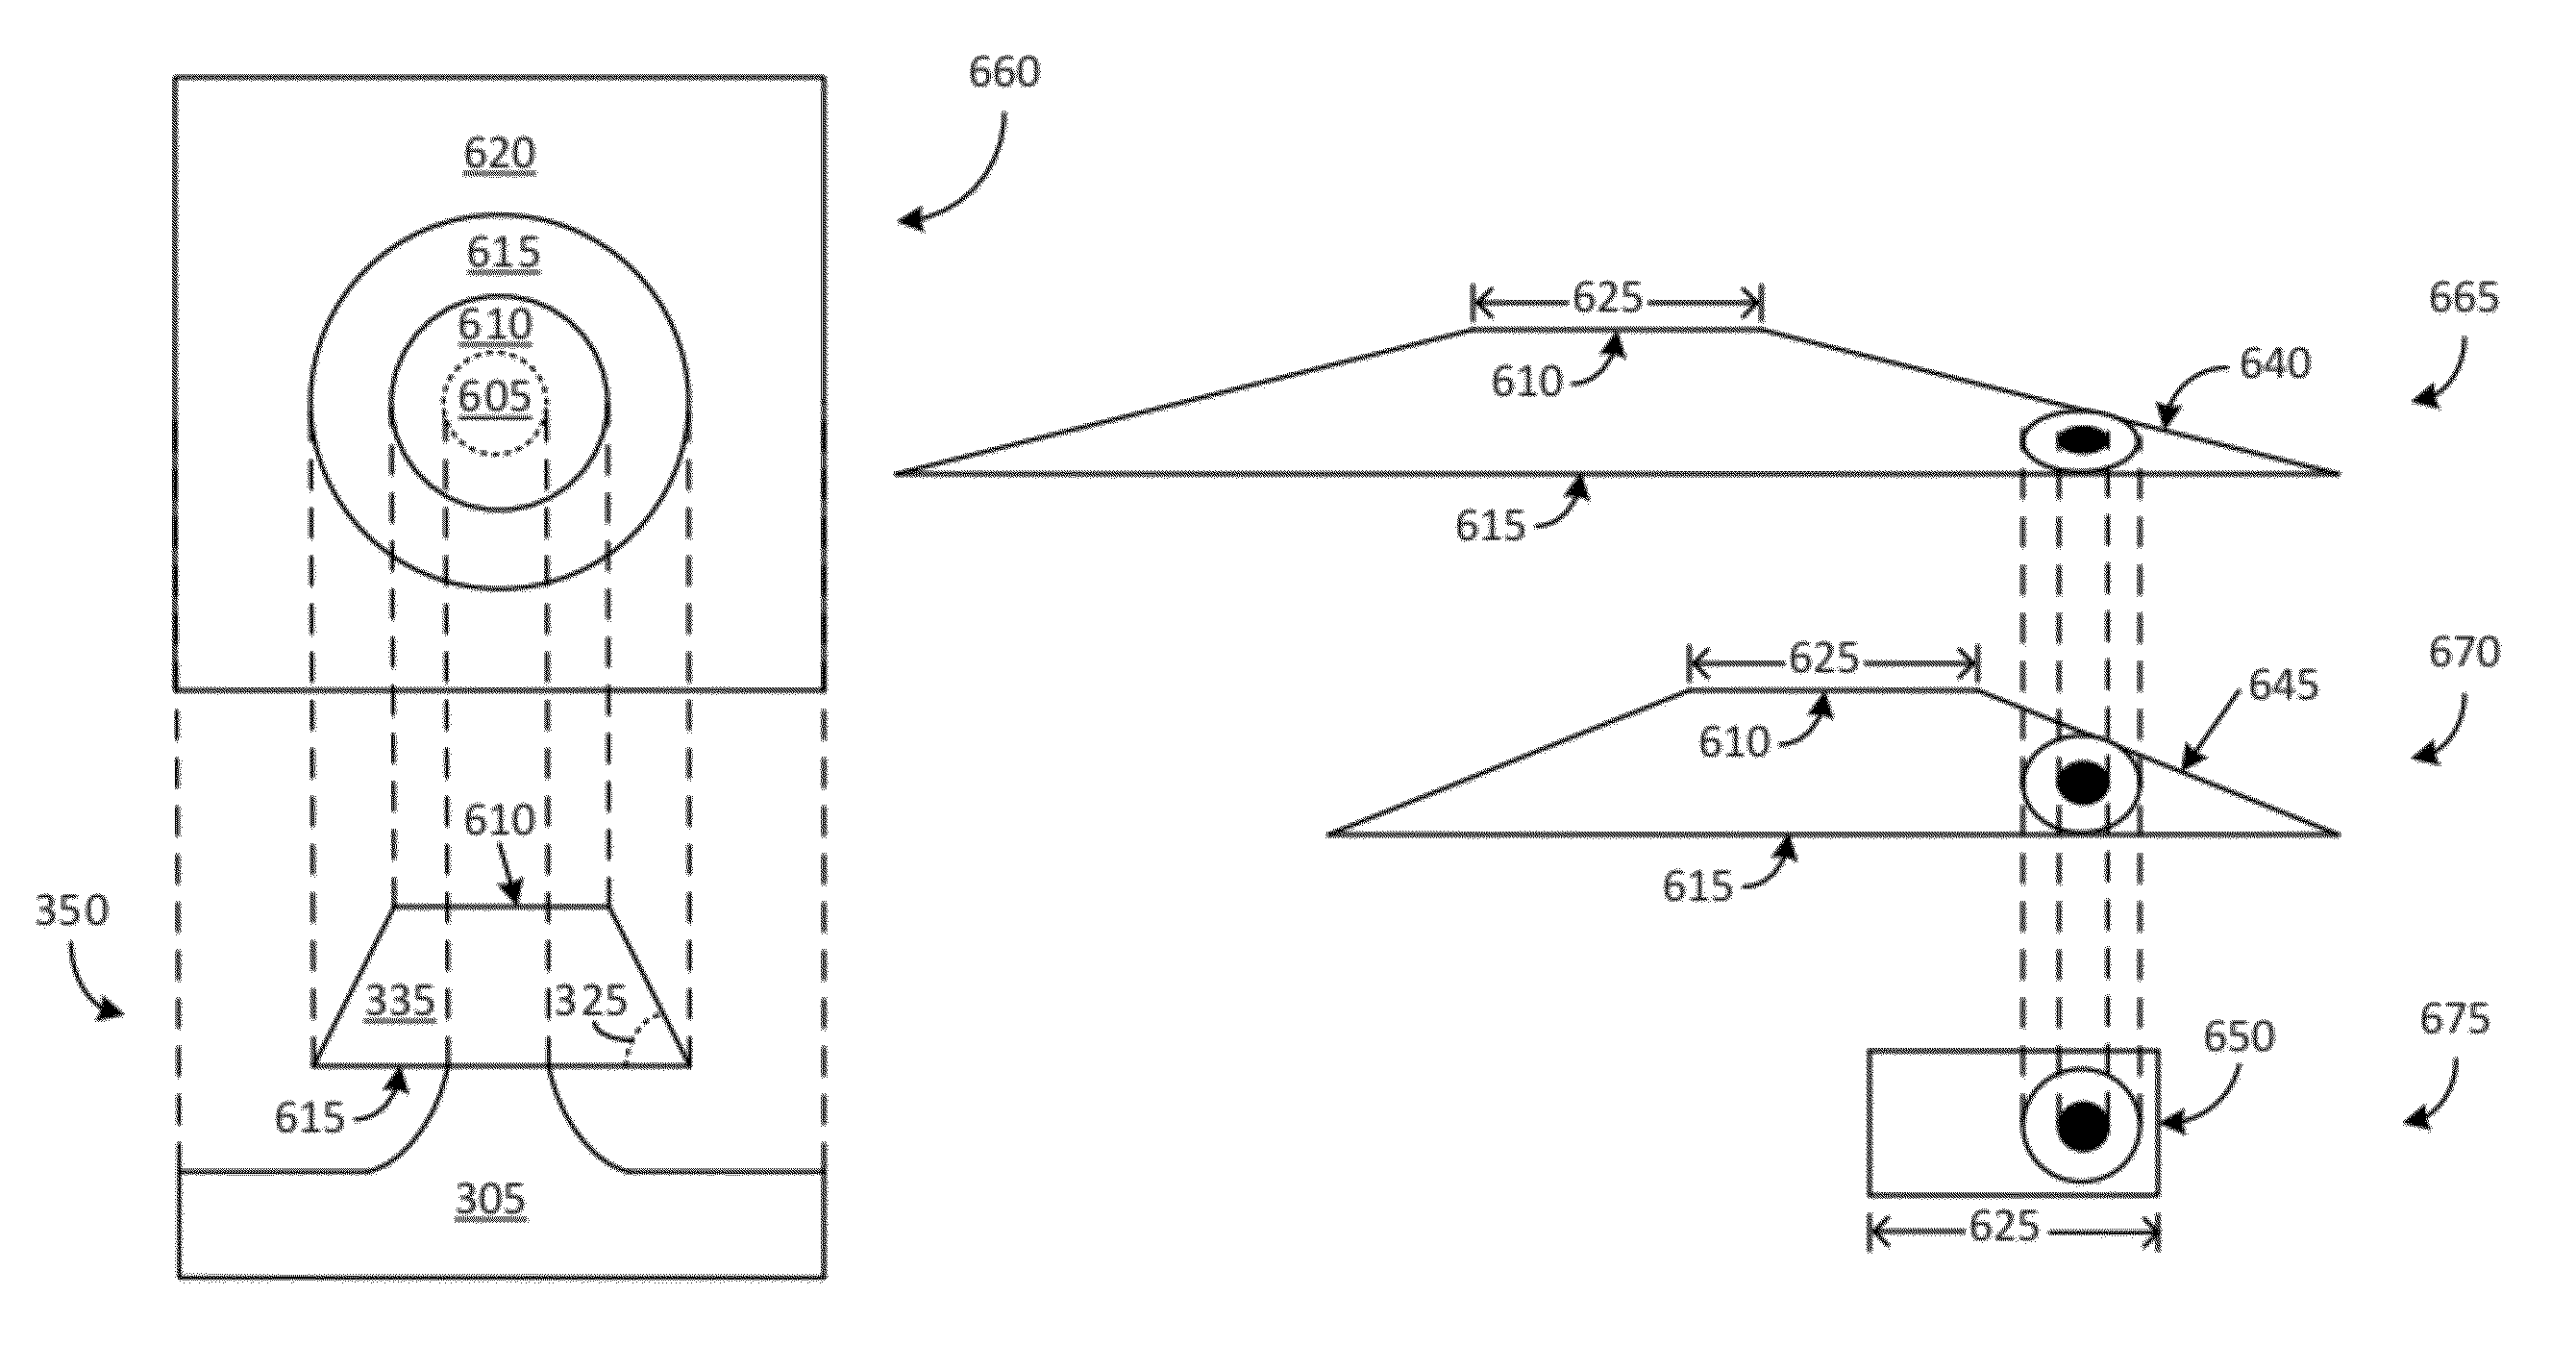 Chip-based frequency comb generator with microwave repetition rate